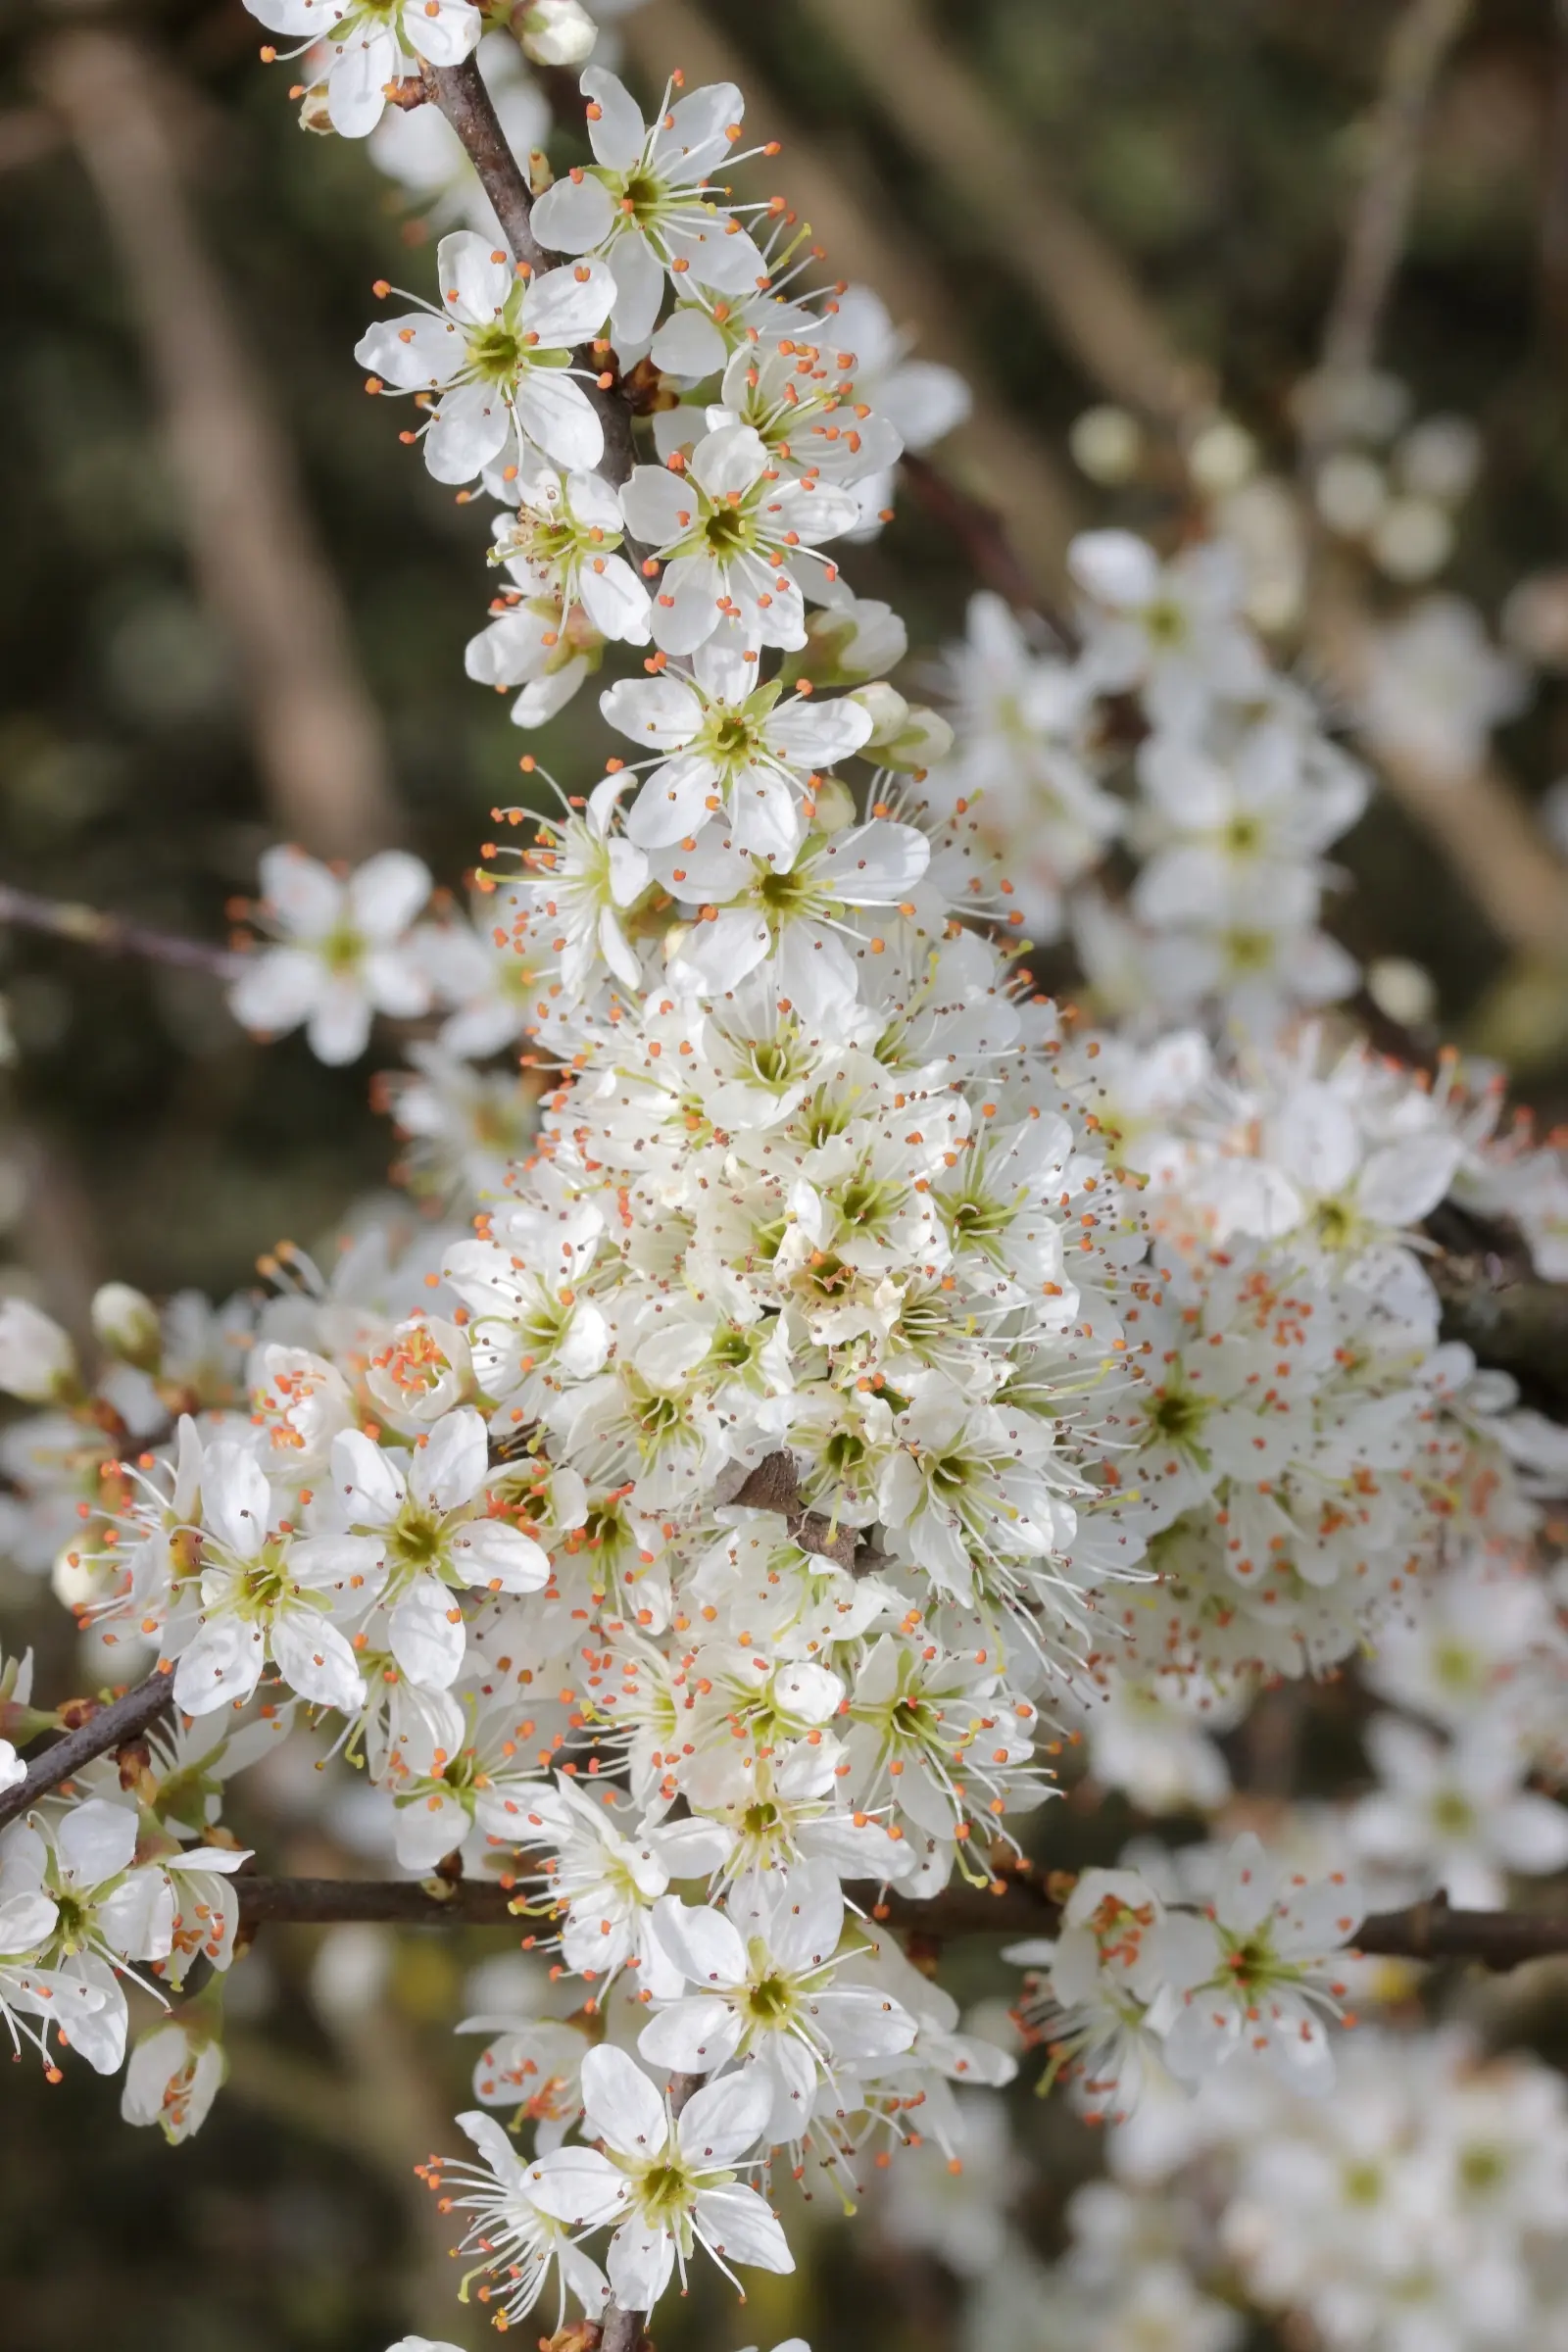 A large number of white flowers of blackthorn on a branch. The individual flowers have five petals and a multitude of orange anthers. In the centre of the flower are the yellow-green coloured pistils, which sit on a long stalk. The bracts are yellow-green in colour.